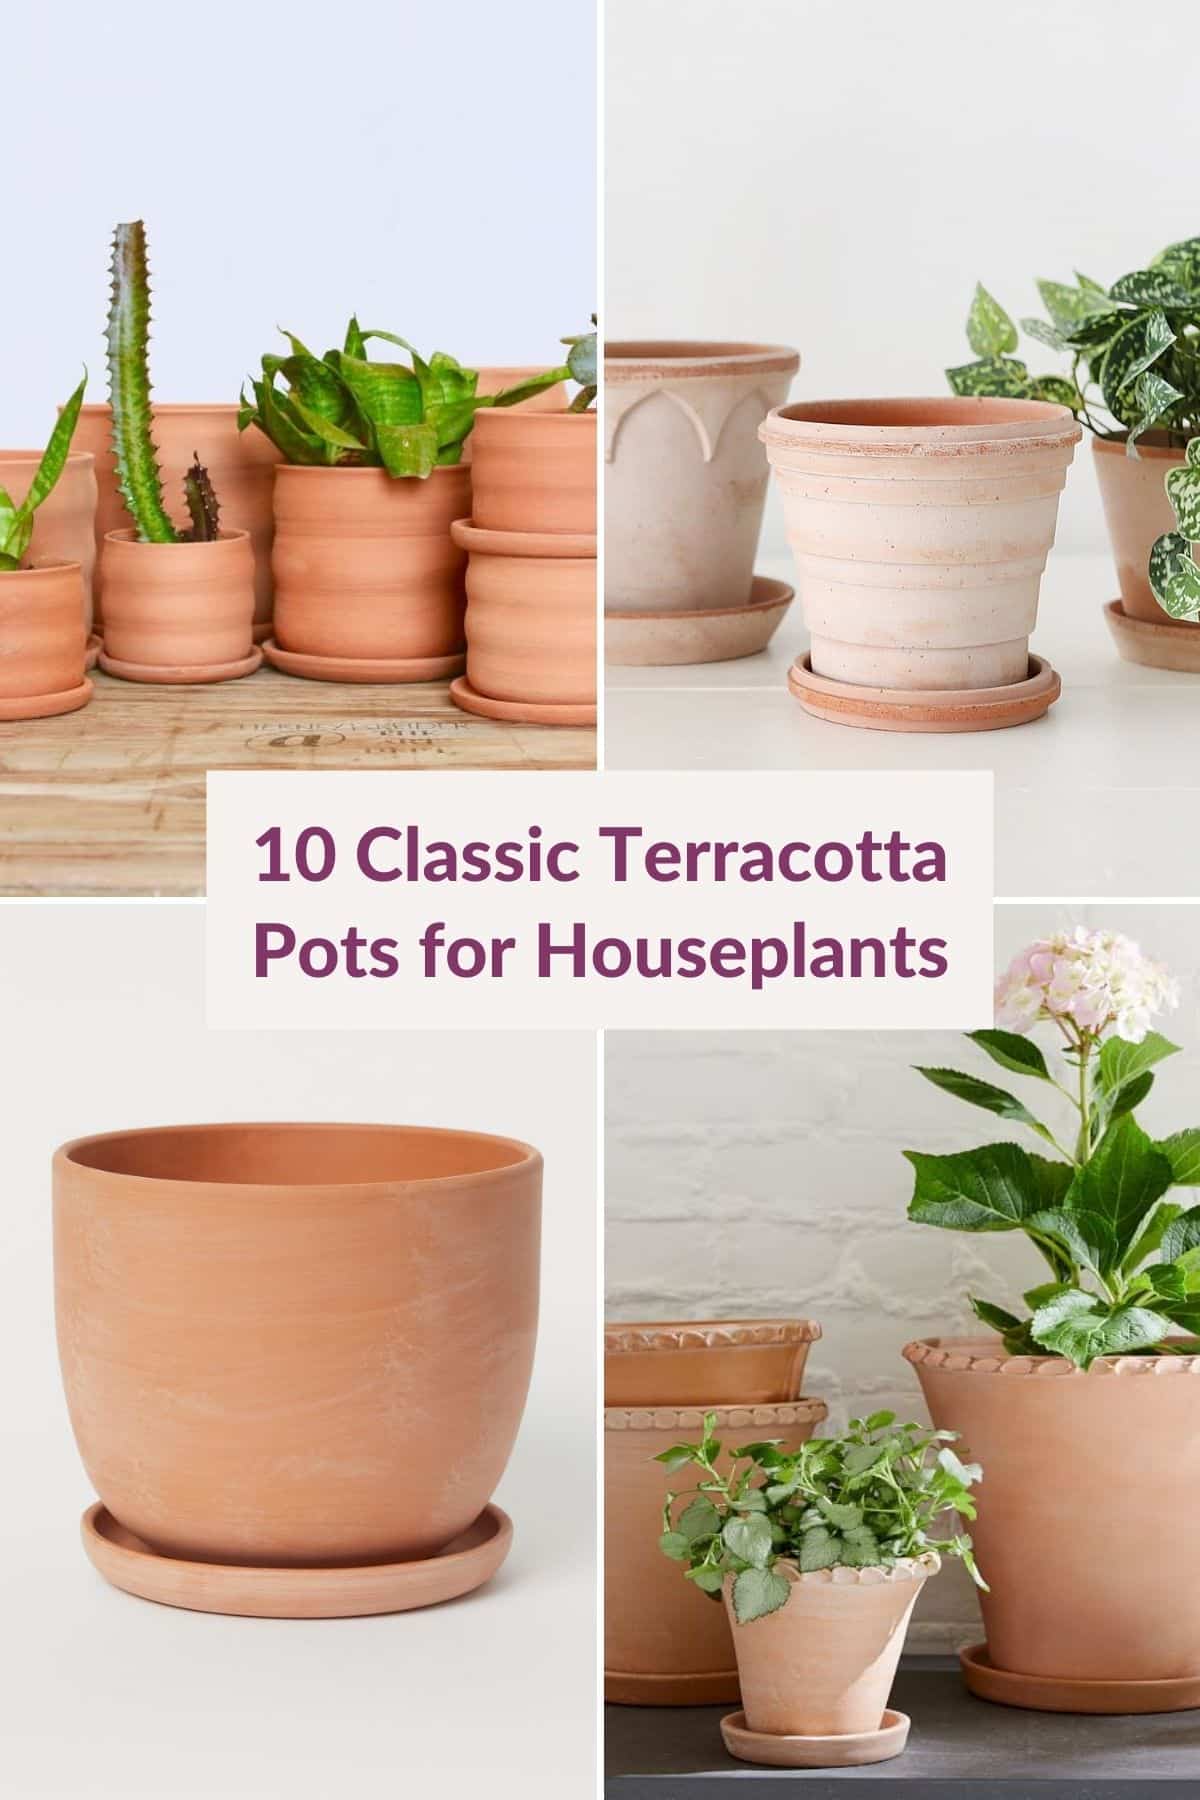 10 classic terracotta pots for houseplants you'll love in 2022